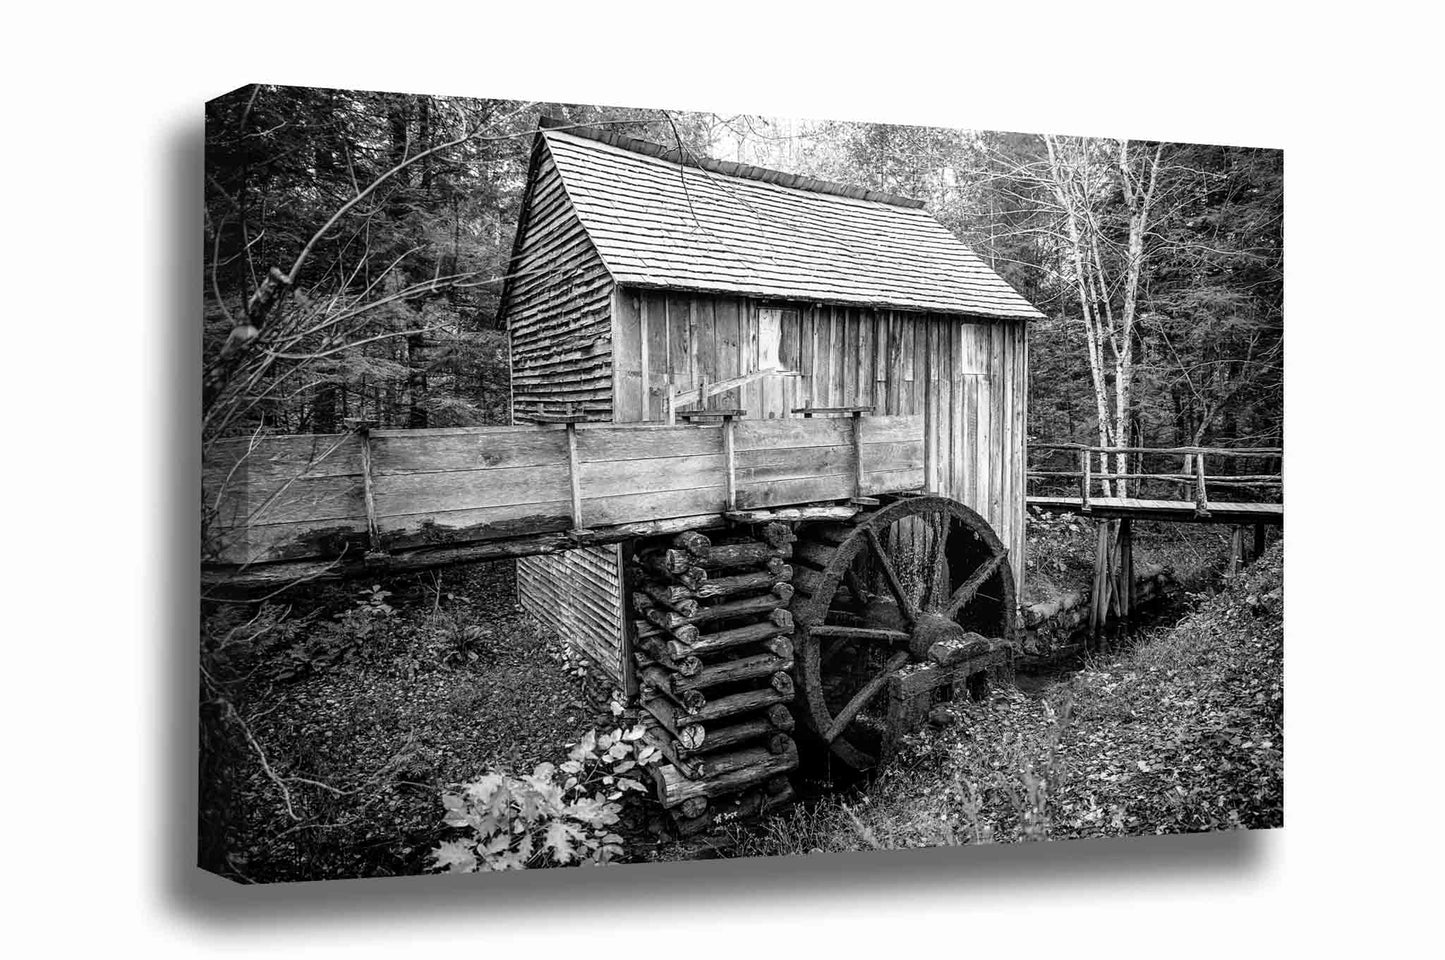 Black and white canvas wall art of the John Cable Mill on an autumn day at Cades Cove in the Great Smoky Mountains of Tennessee by Sean Ramsey of Southern Plains Photography.